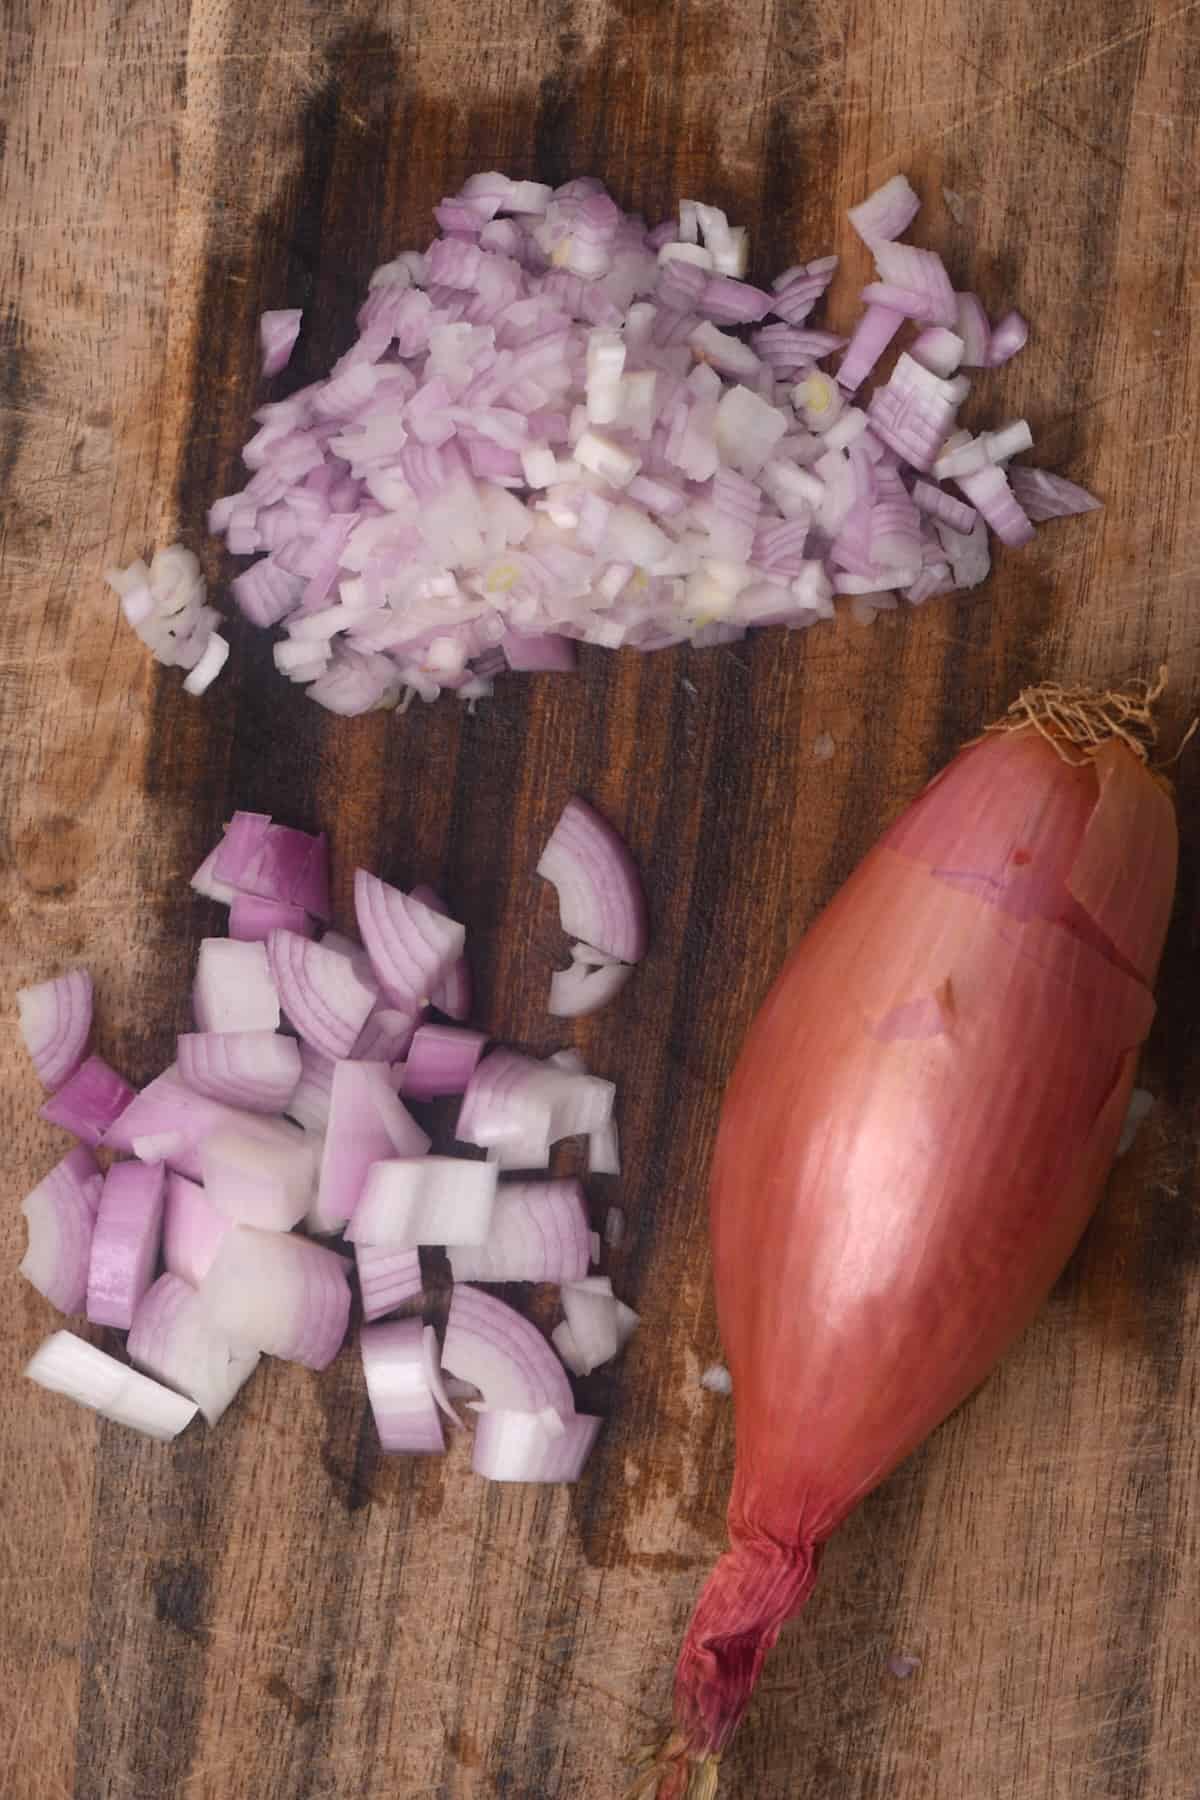 Chopped and diced onion